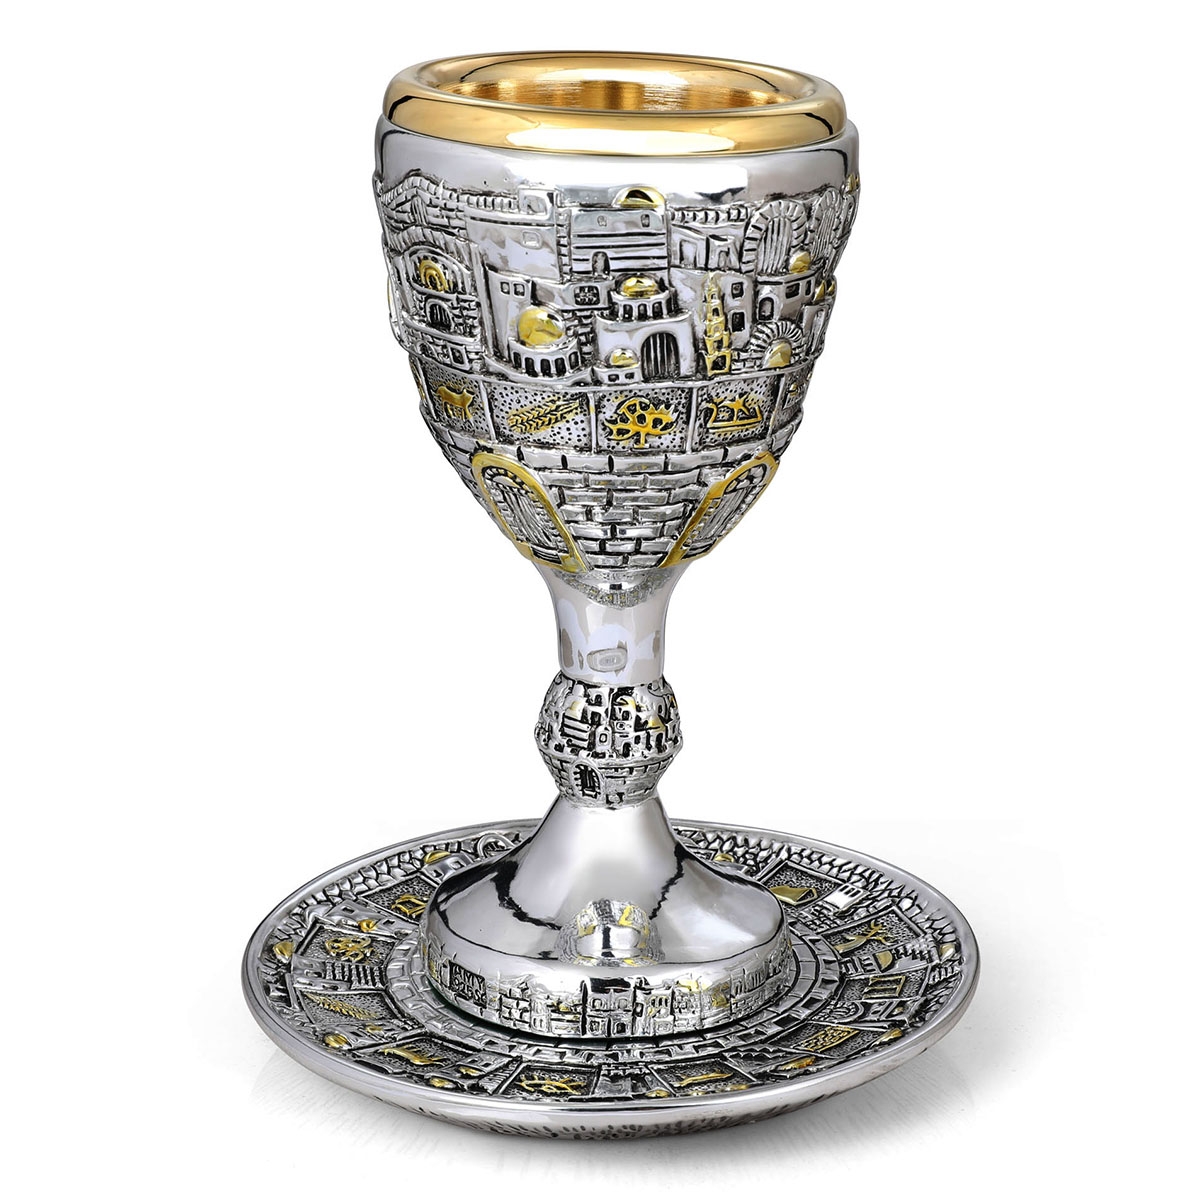 Jerusalem View 12 Tribes Silver-Plated Kiddush Cup  - 1